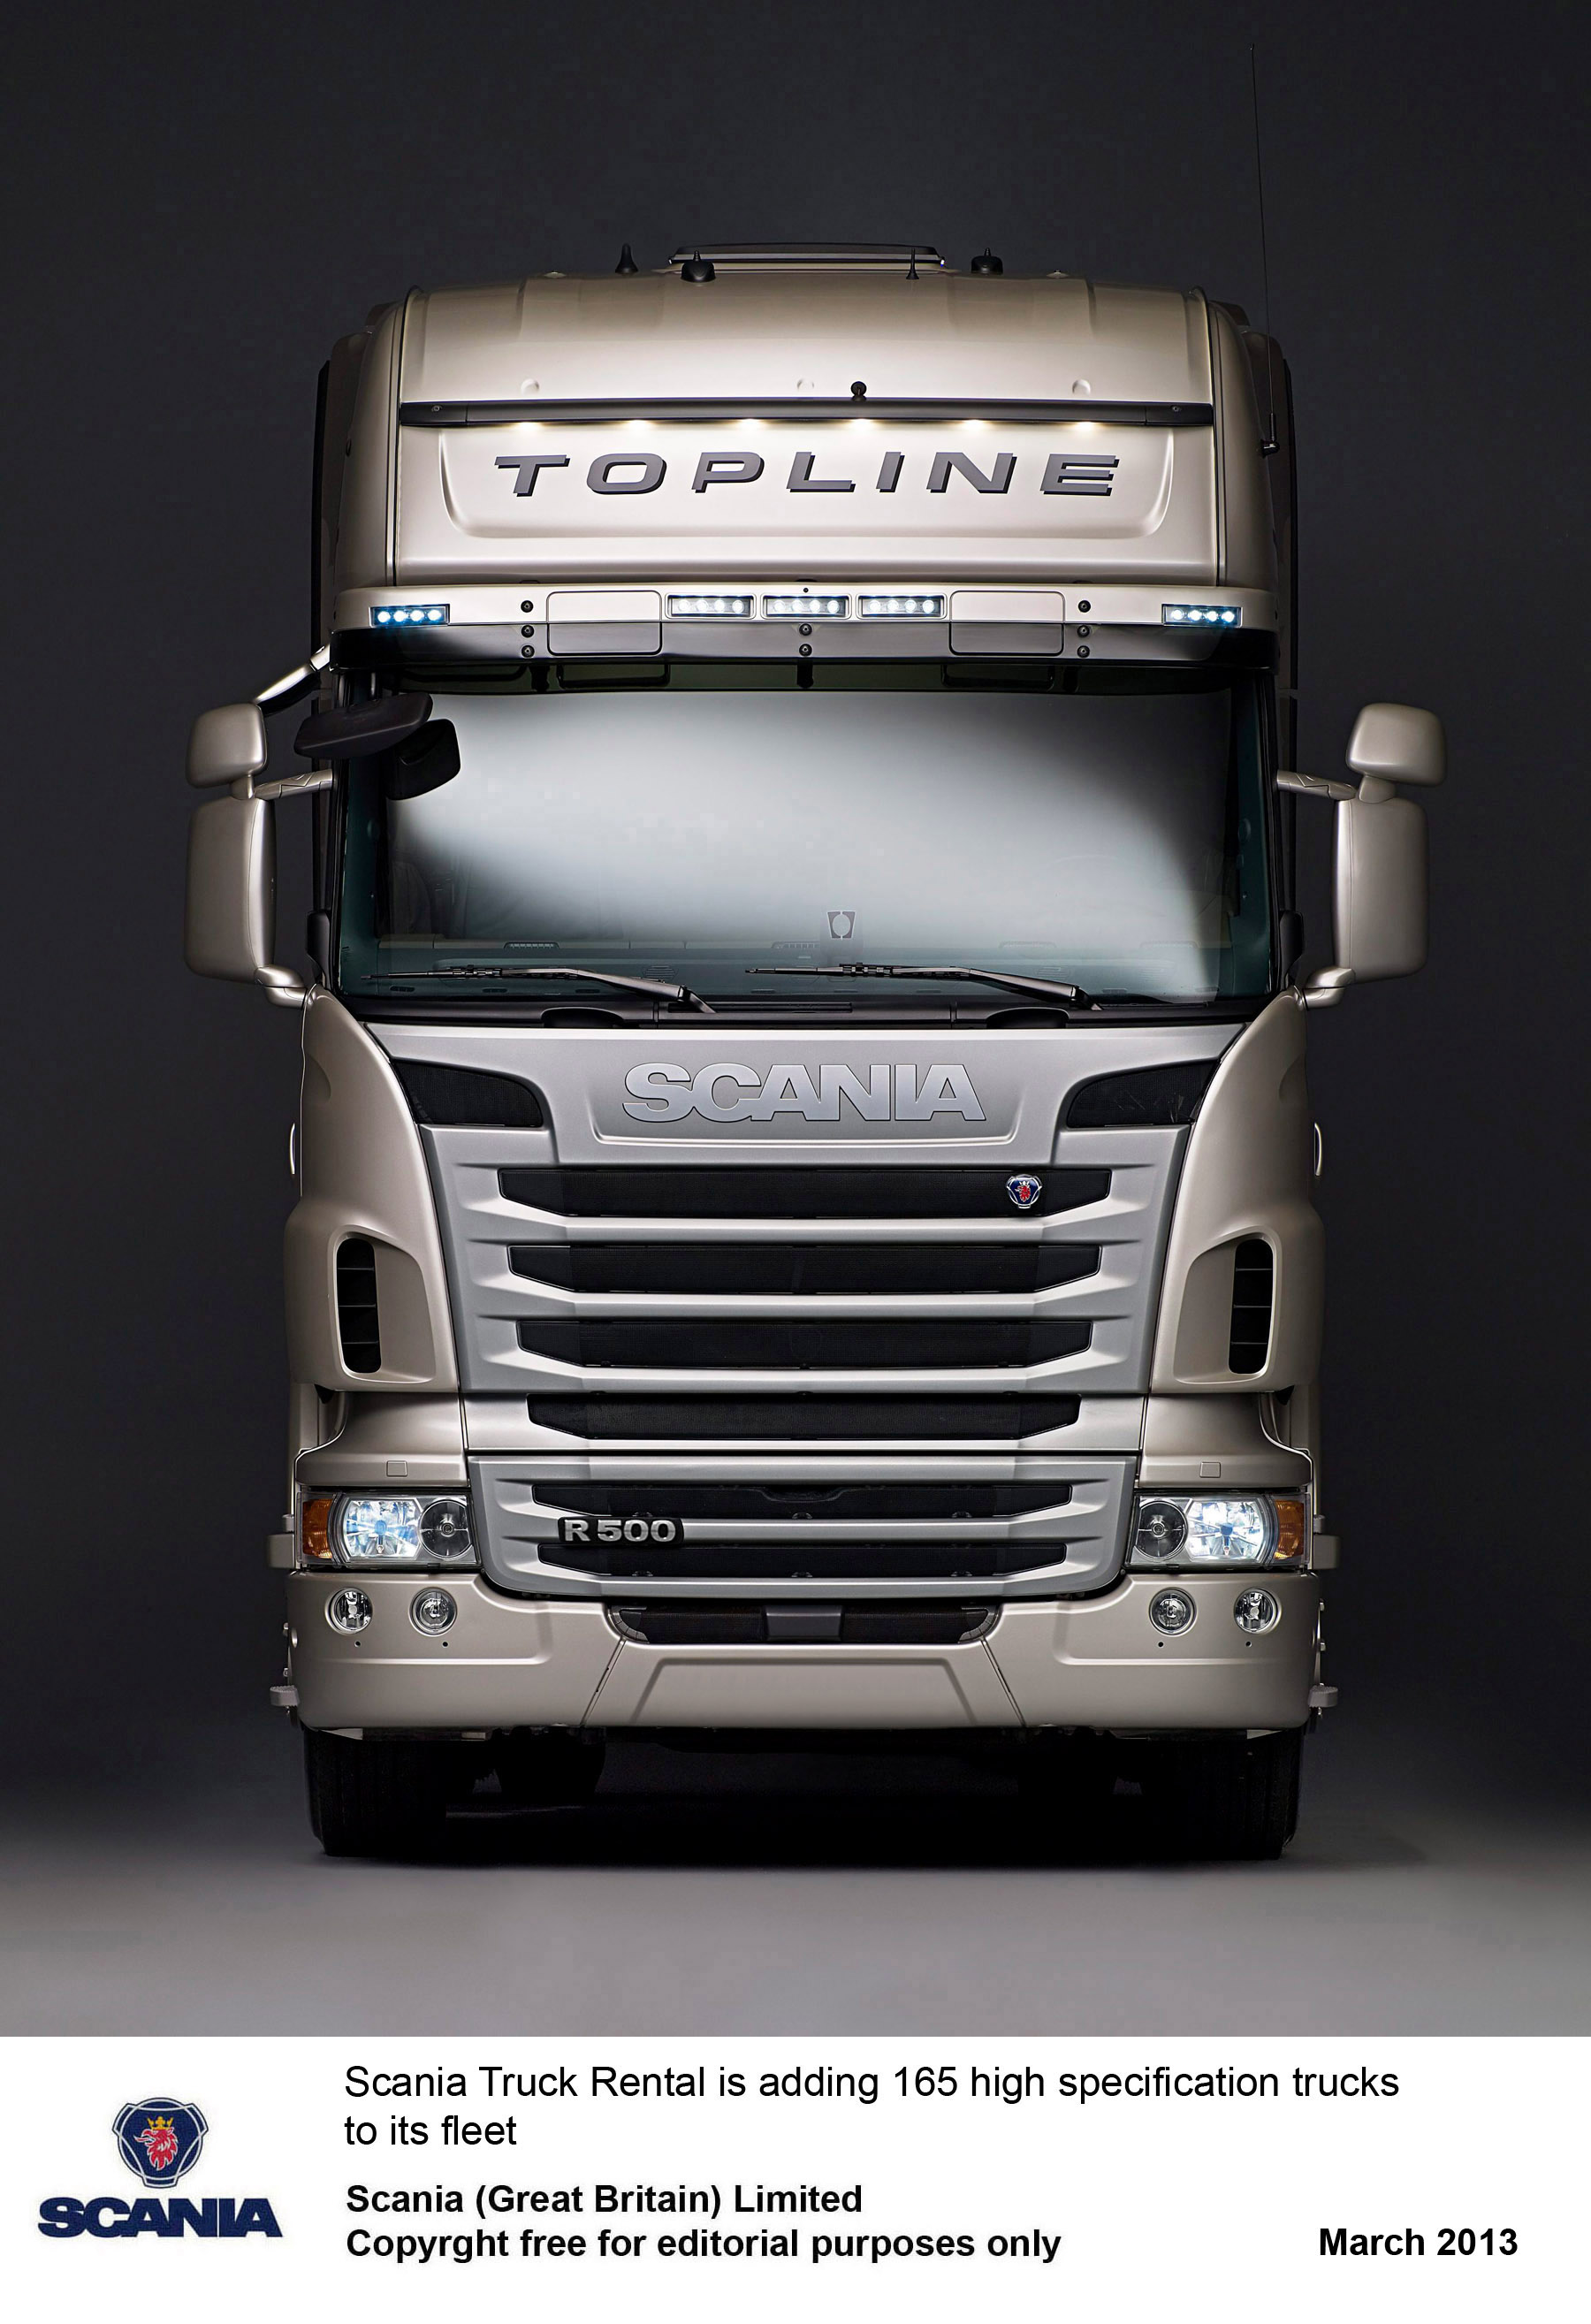 Scania Truck Rental, The Nationwide Commercial Vehicle - New Scania Lorry , HD Wallpaper & Backgrounds